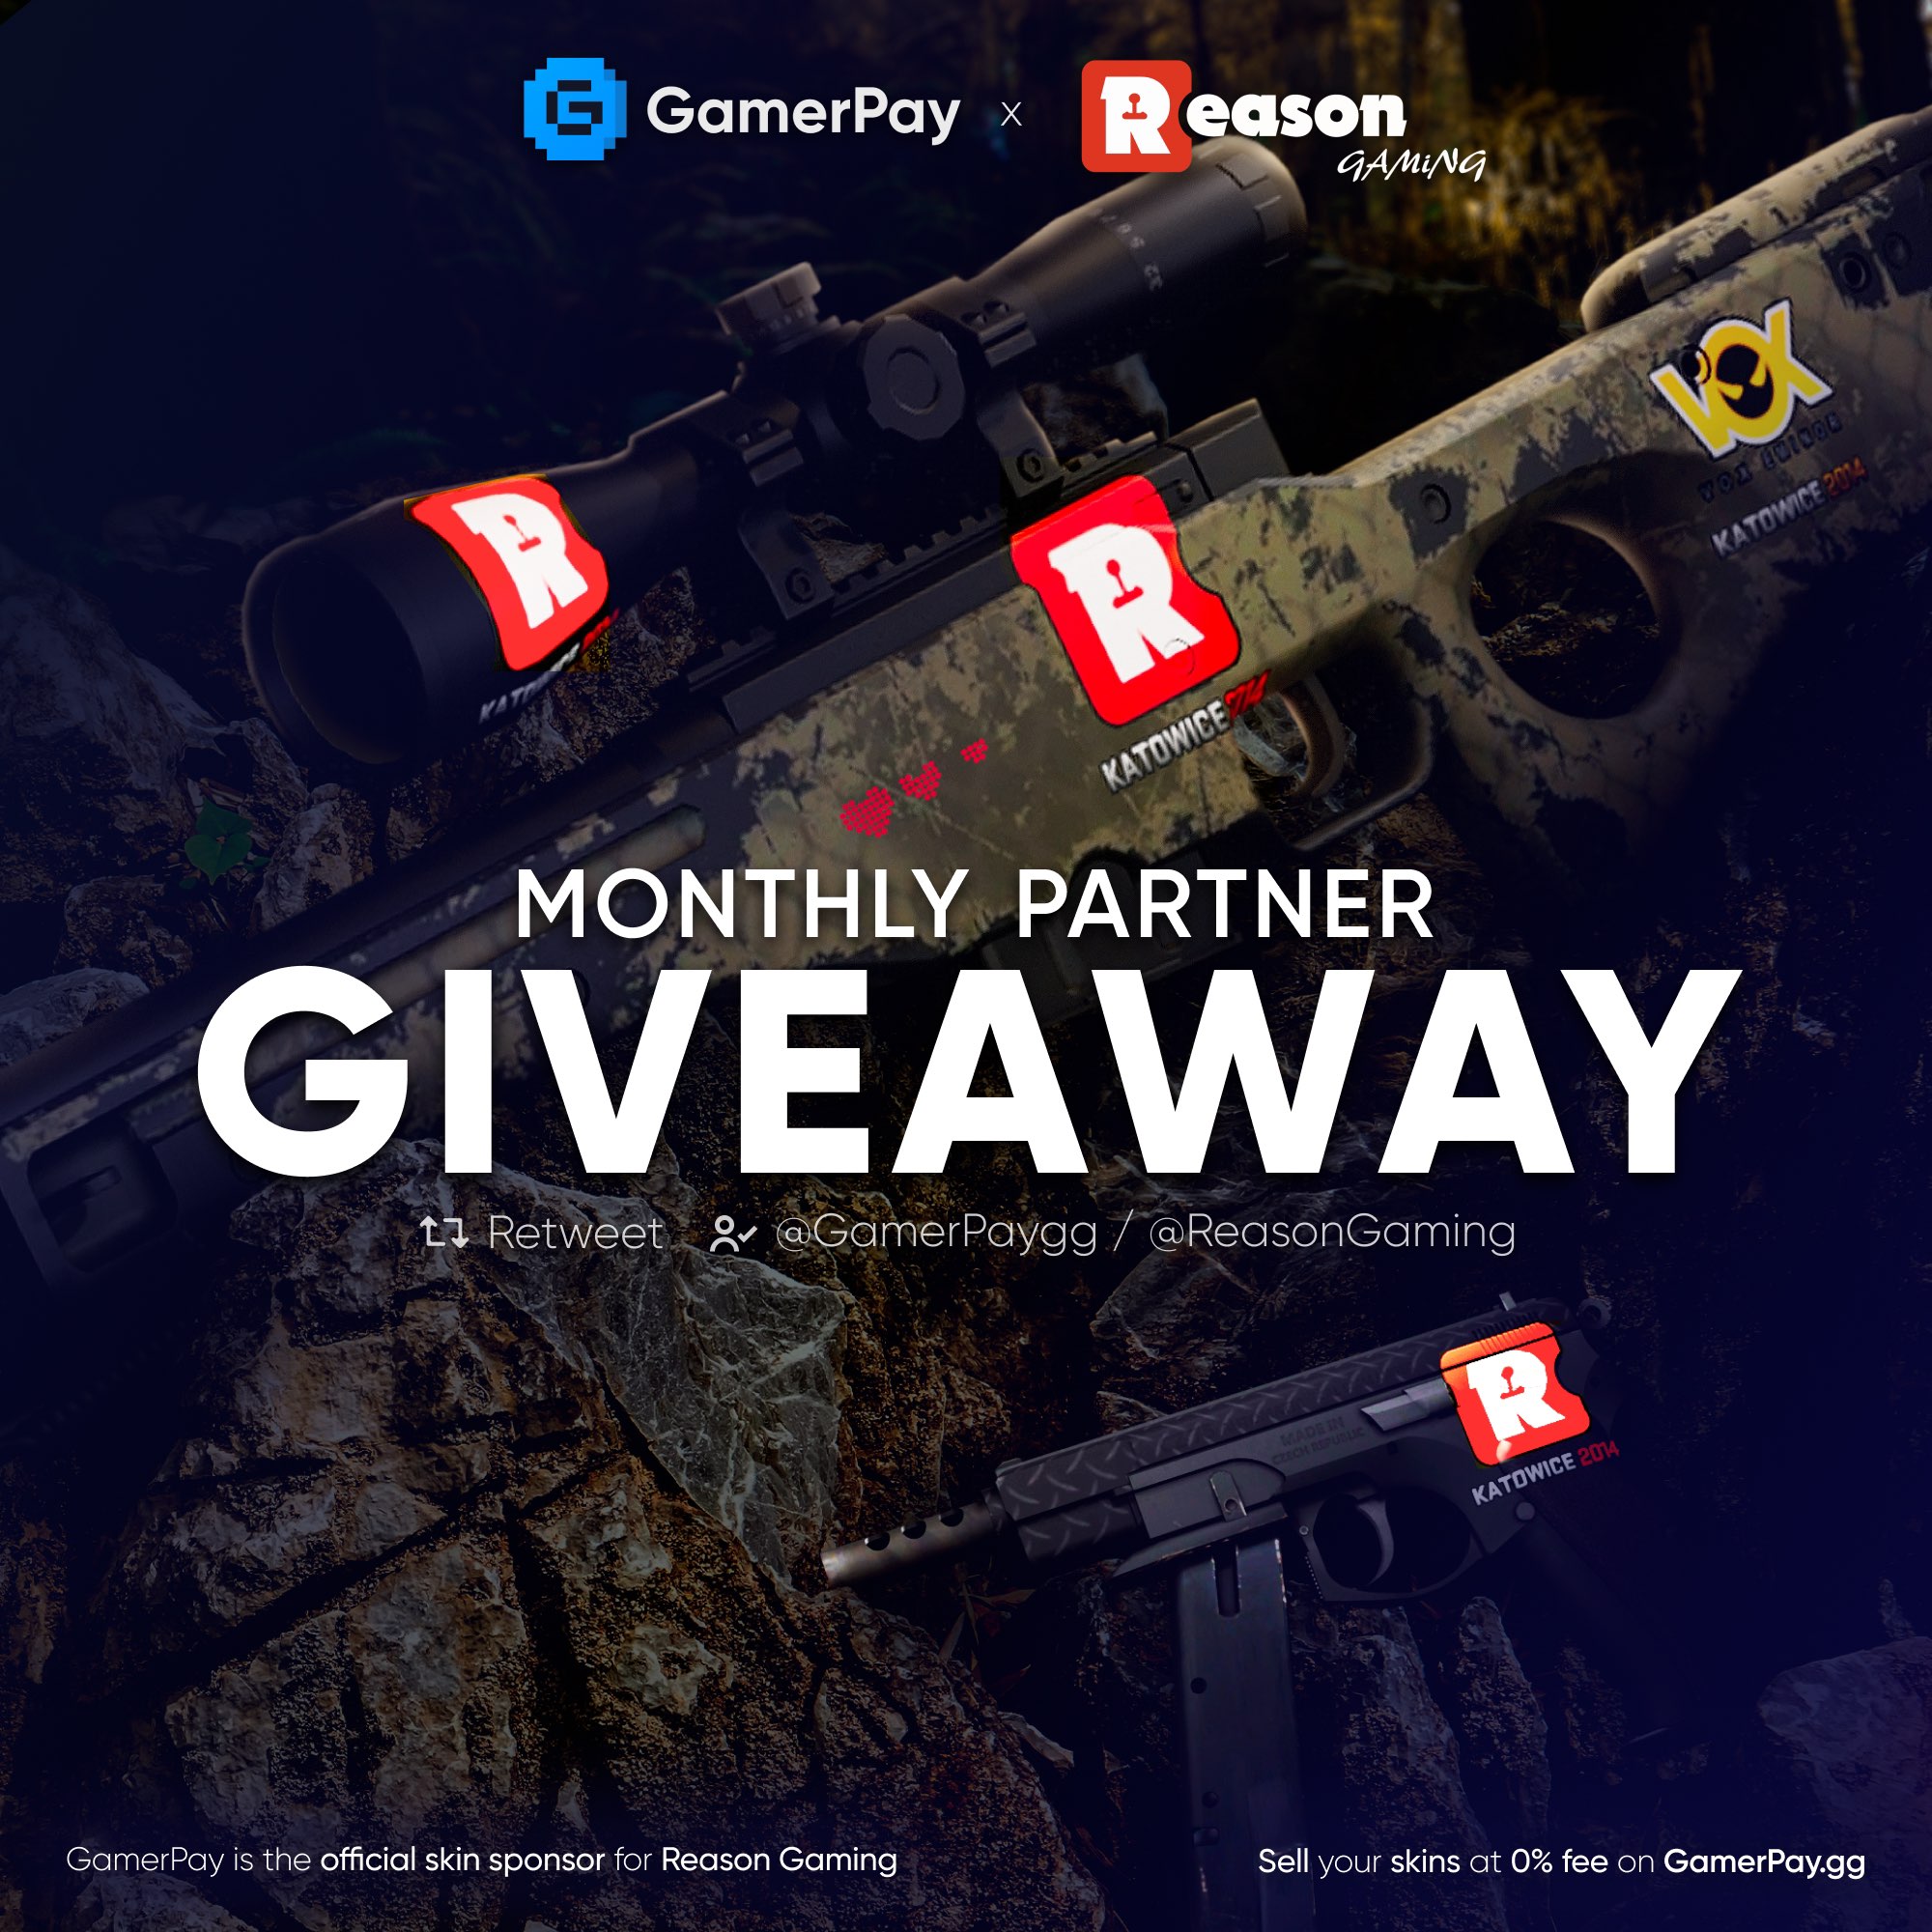 GamerPay x Reason Giveaway March